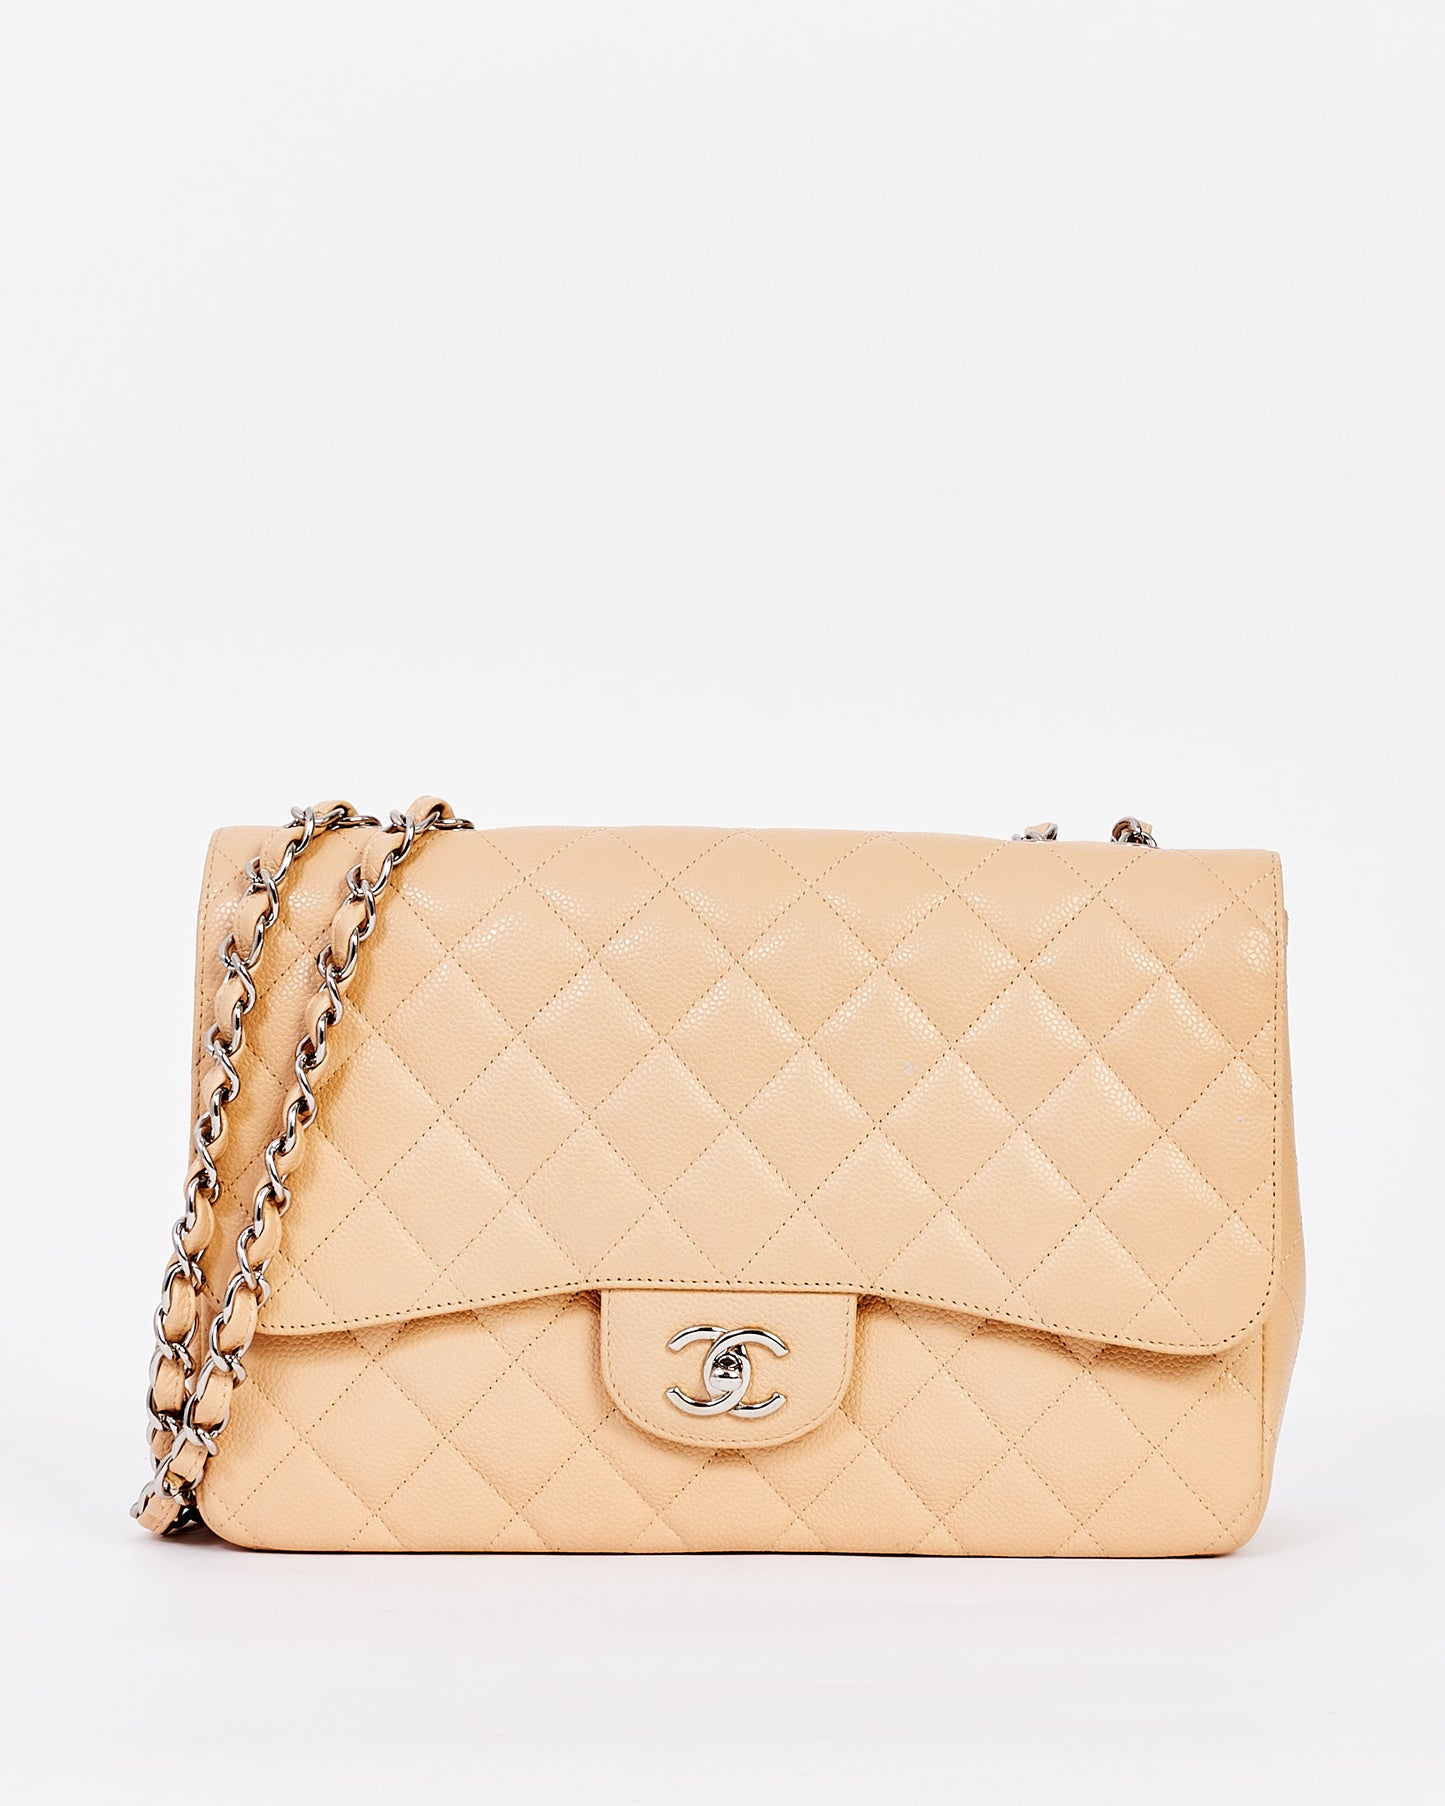 Chanel Beige Quilted Caviar Leather Jumbo Single Flap Bag with Silver Hardware